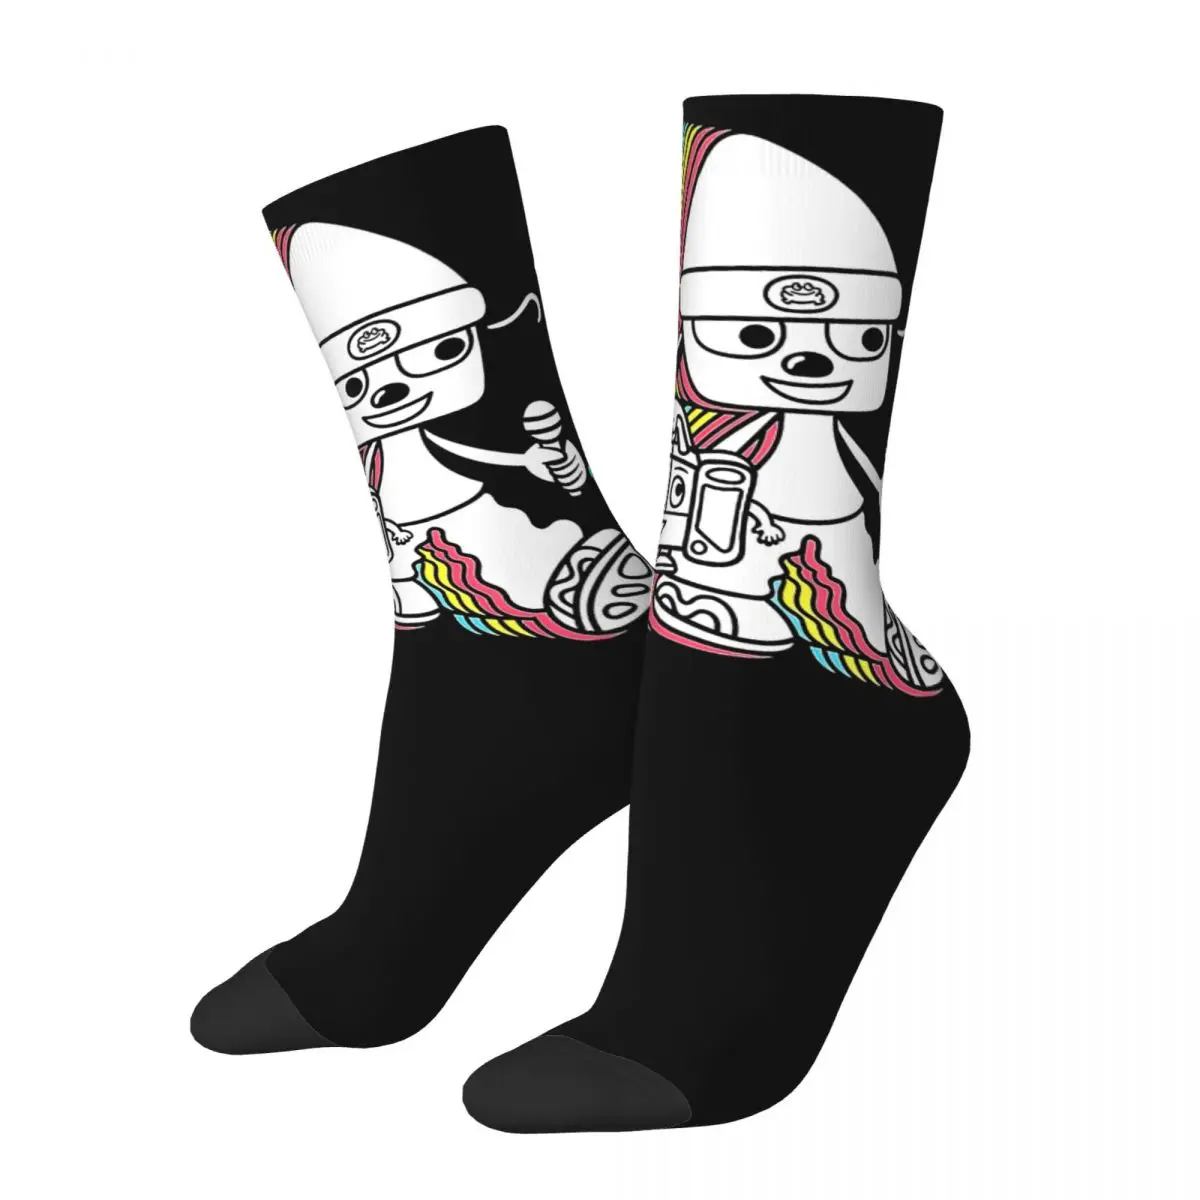 

Funny Crazy Sock for Men Neon Hip Hop Vintage PaRappa The Rapper Rhythm Game Happy Quality Pattern Printed Boys Crew Sock Gift